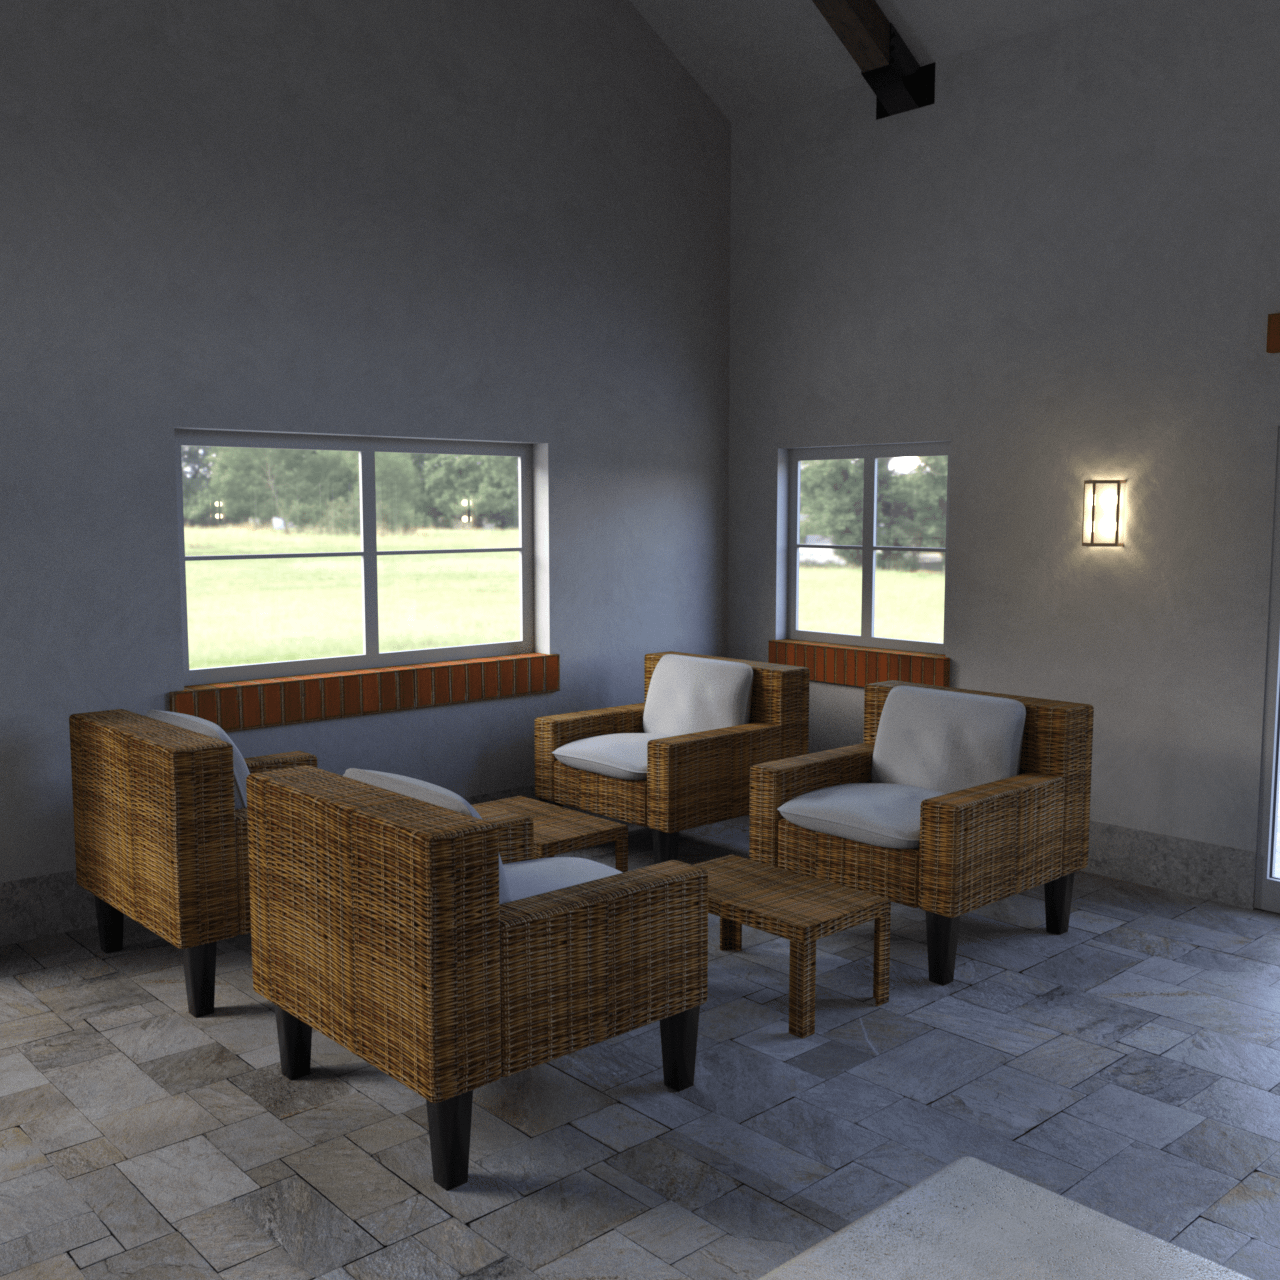 3d models of furnitures used in the pool house